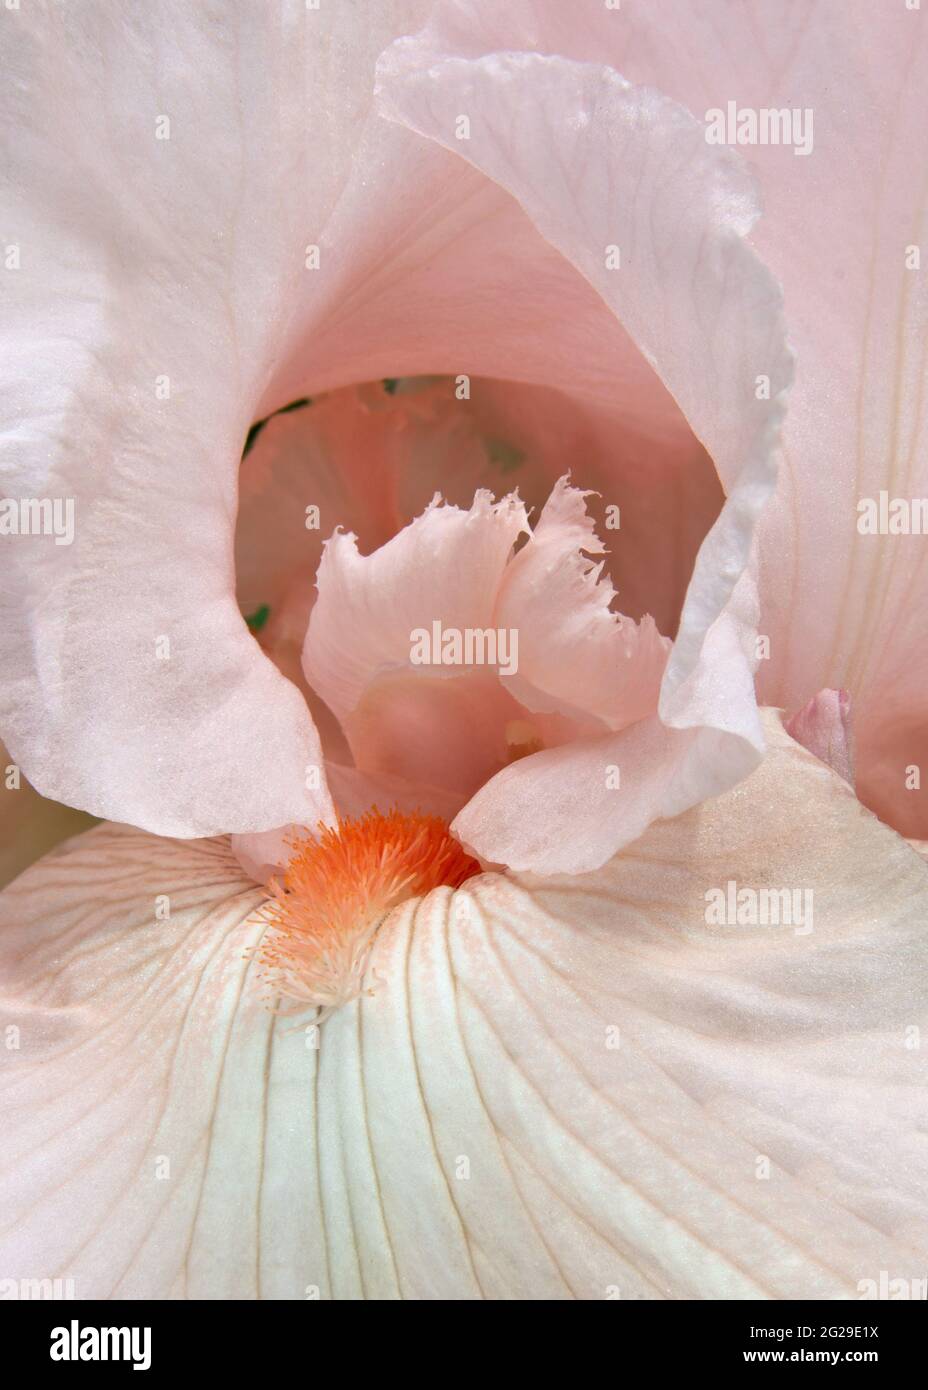 Beauty in nature. Macro photograph showing intricate details of lovely pink bearded iris blossom (Iris germanica) with a prominent orange beard. Stock Photo